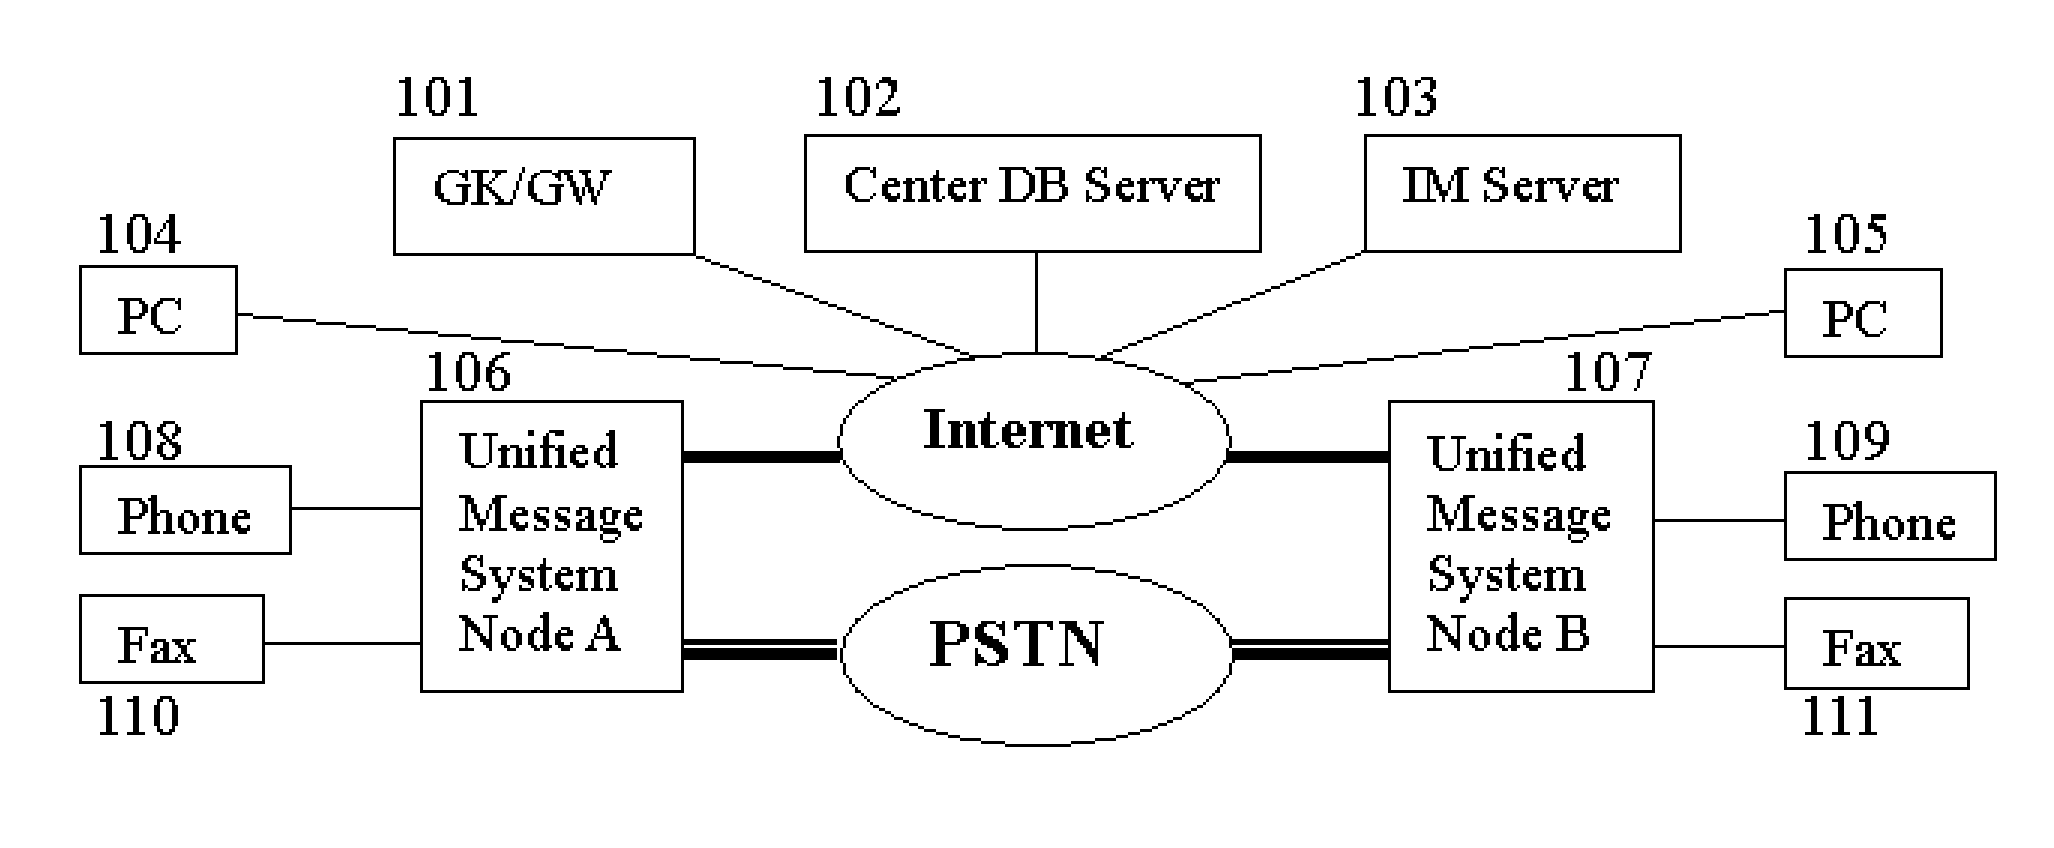 Method and system for integrating instant message into unified message